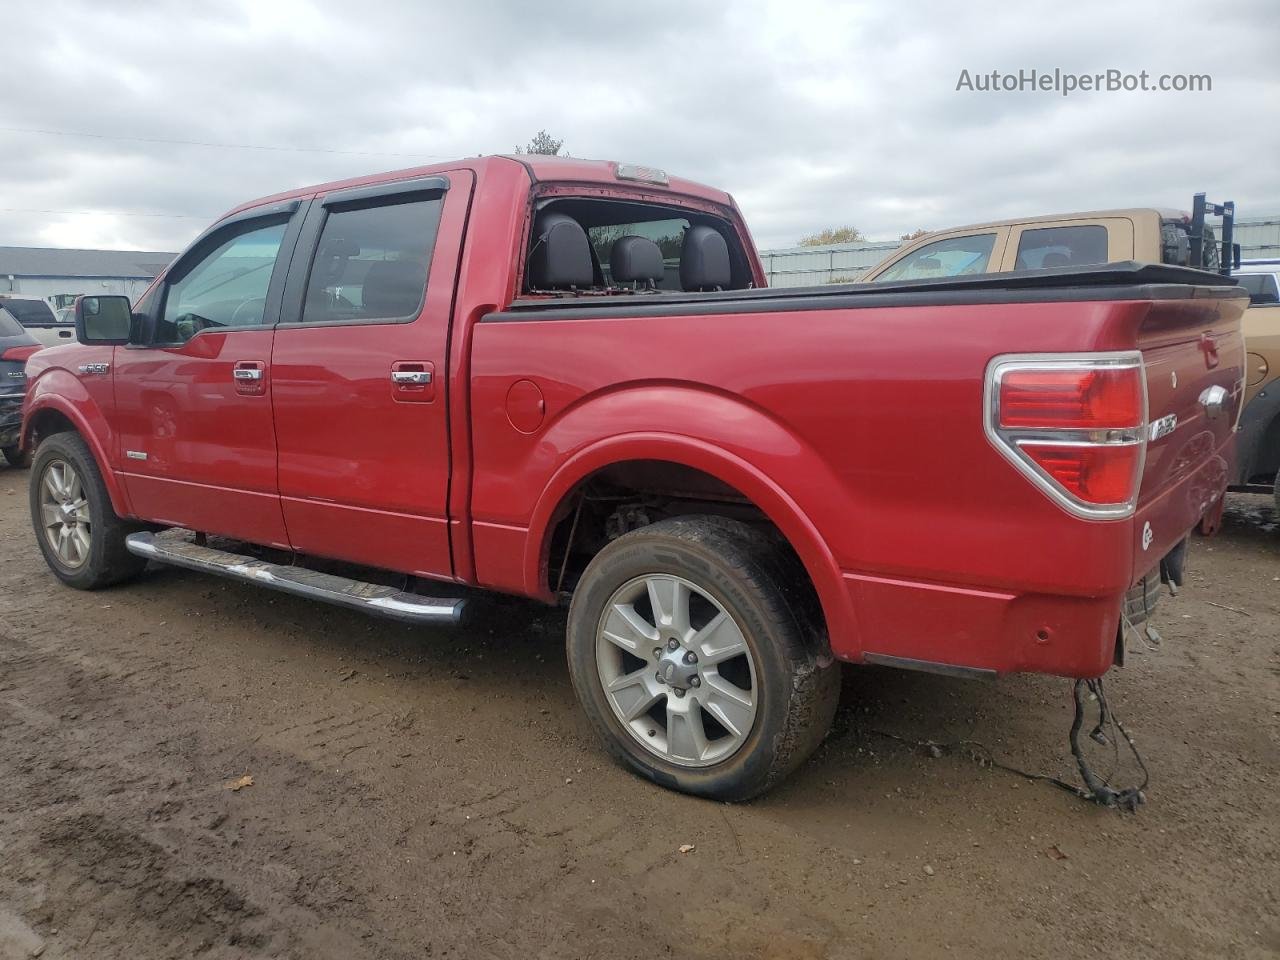 2011 Ford F150 Supercrew Red vin: 1FTFW1CT5BFB70097